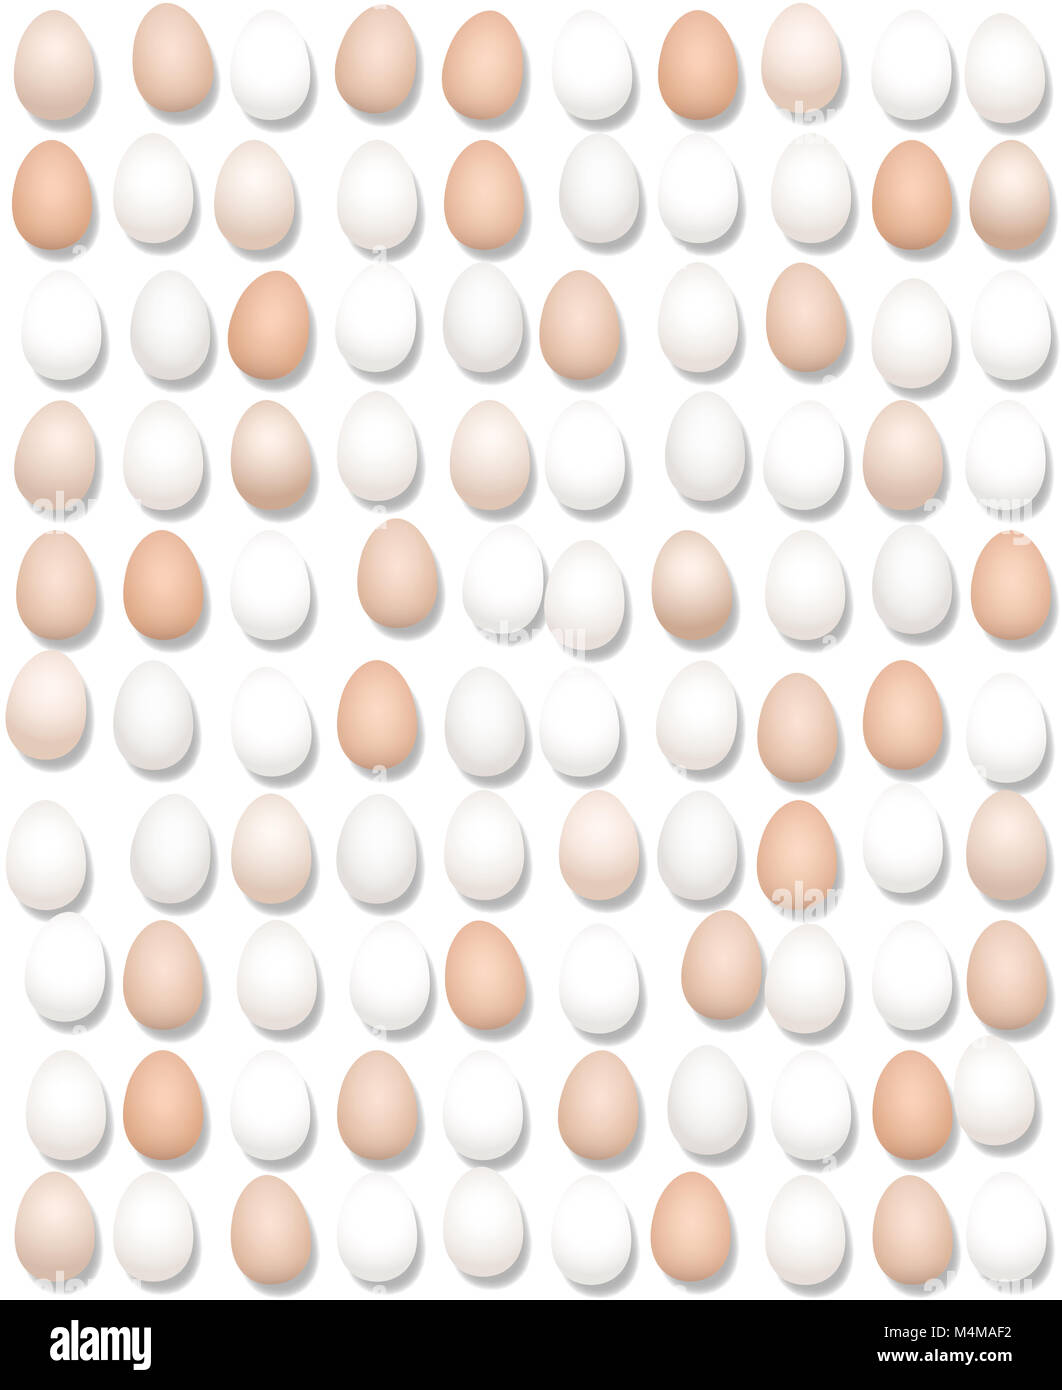 Hundred eggs lined up. Large amount of eggs. Symbolic for excessive egg consumption and for big food business concerning poultry farming. Stock Photo